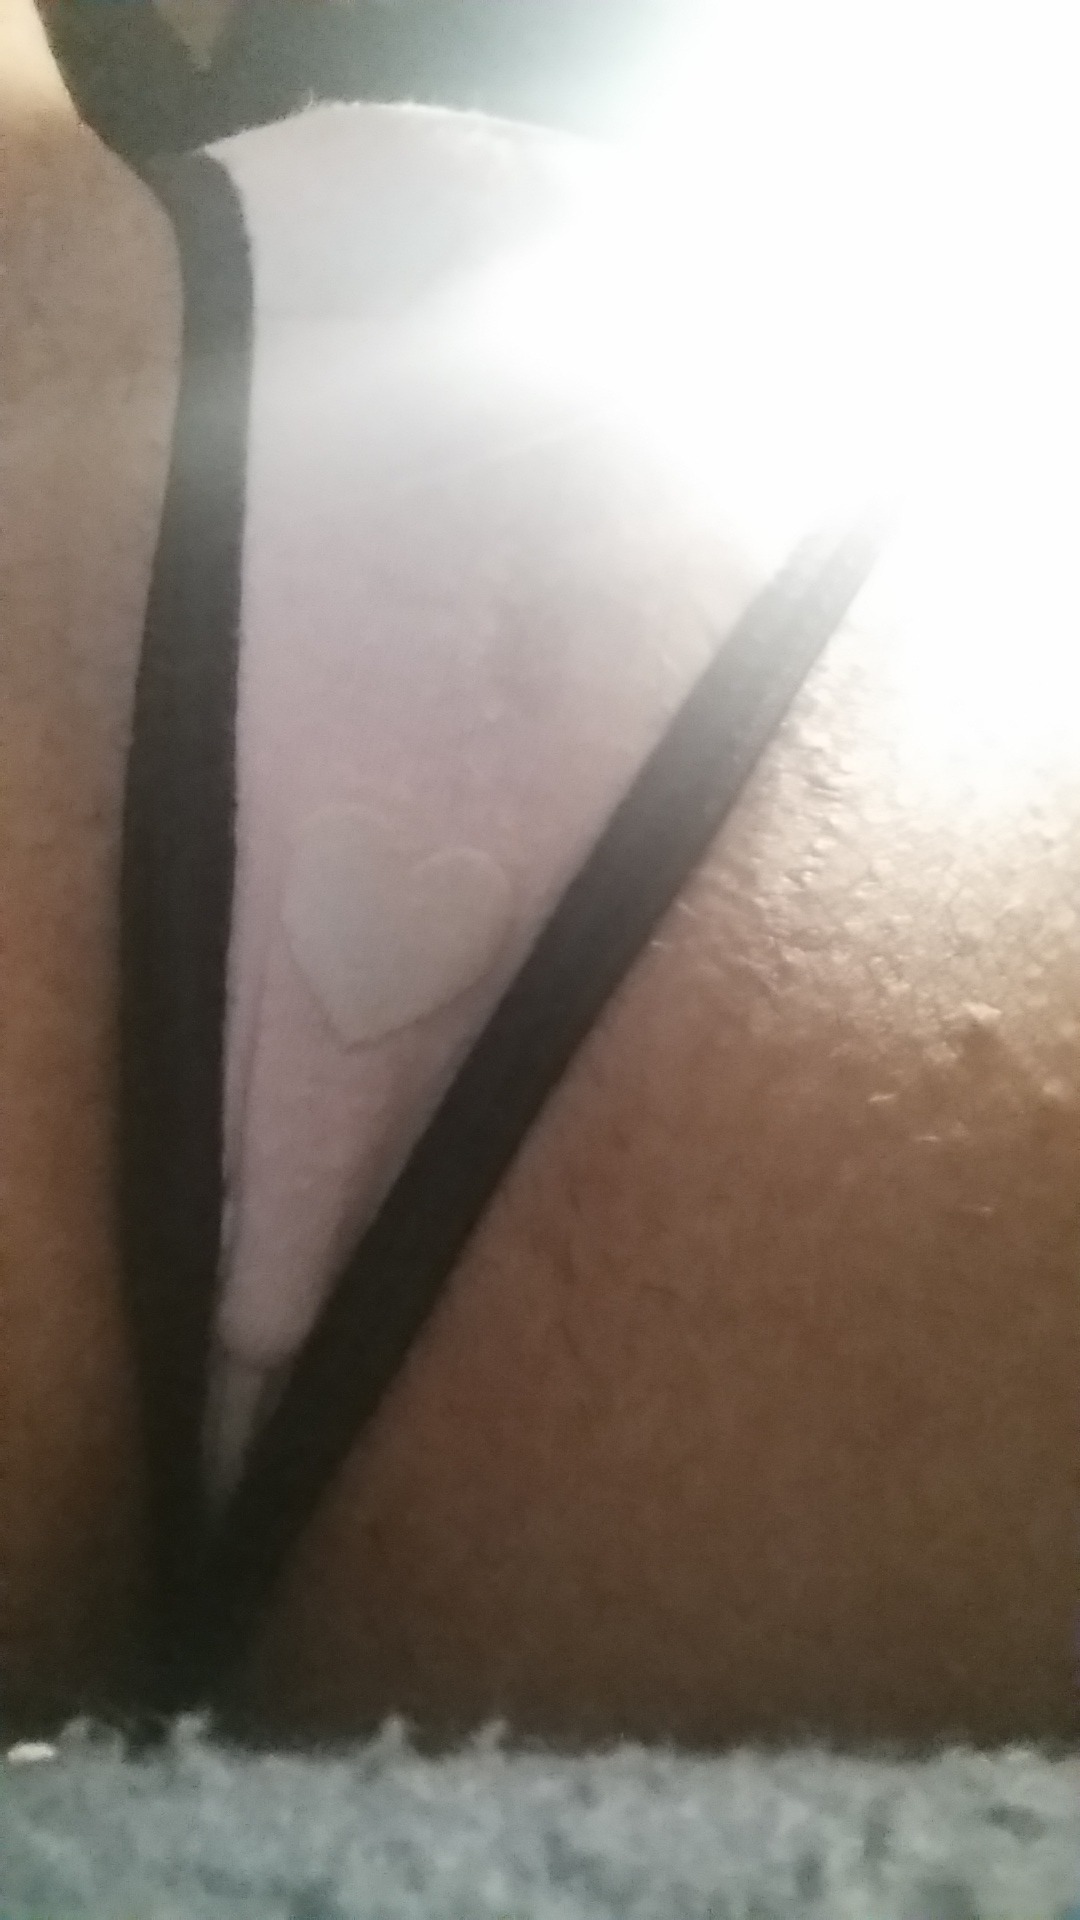 megranalovermachete:     My soaking wet pussy, before I even took my clothes off